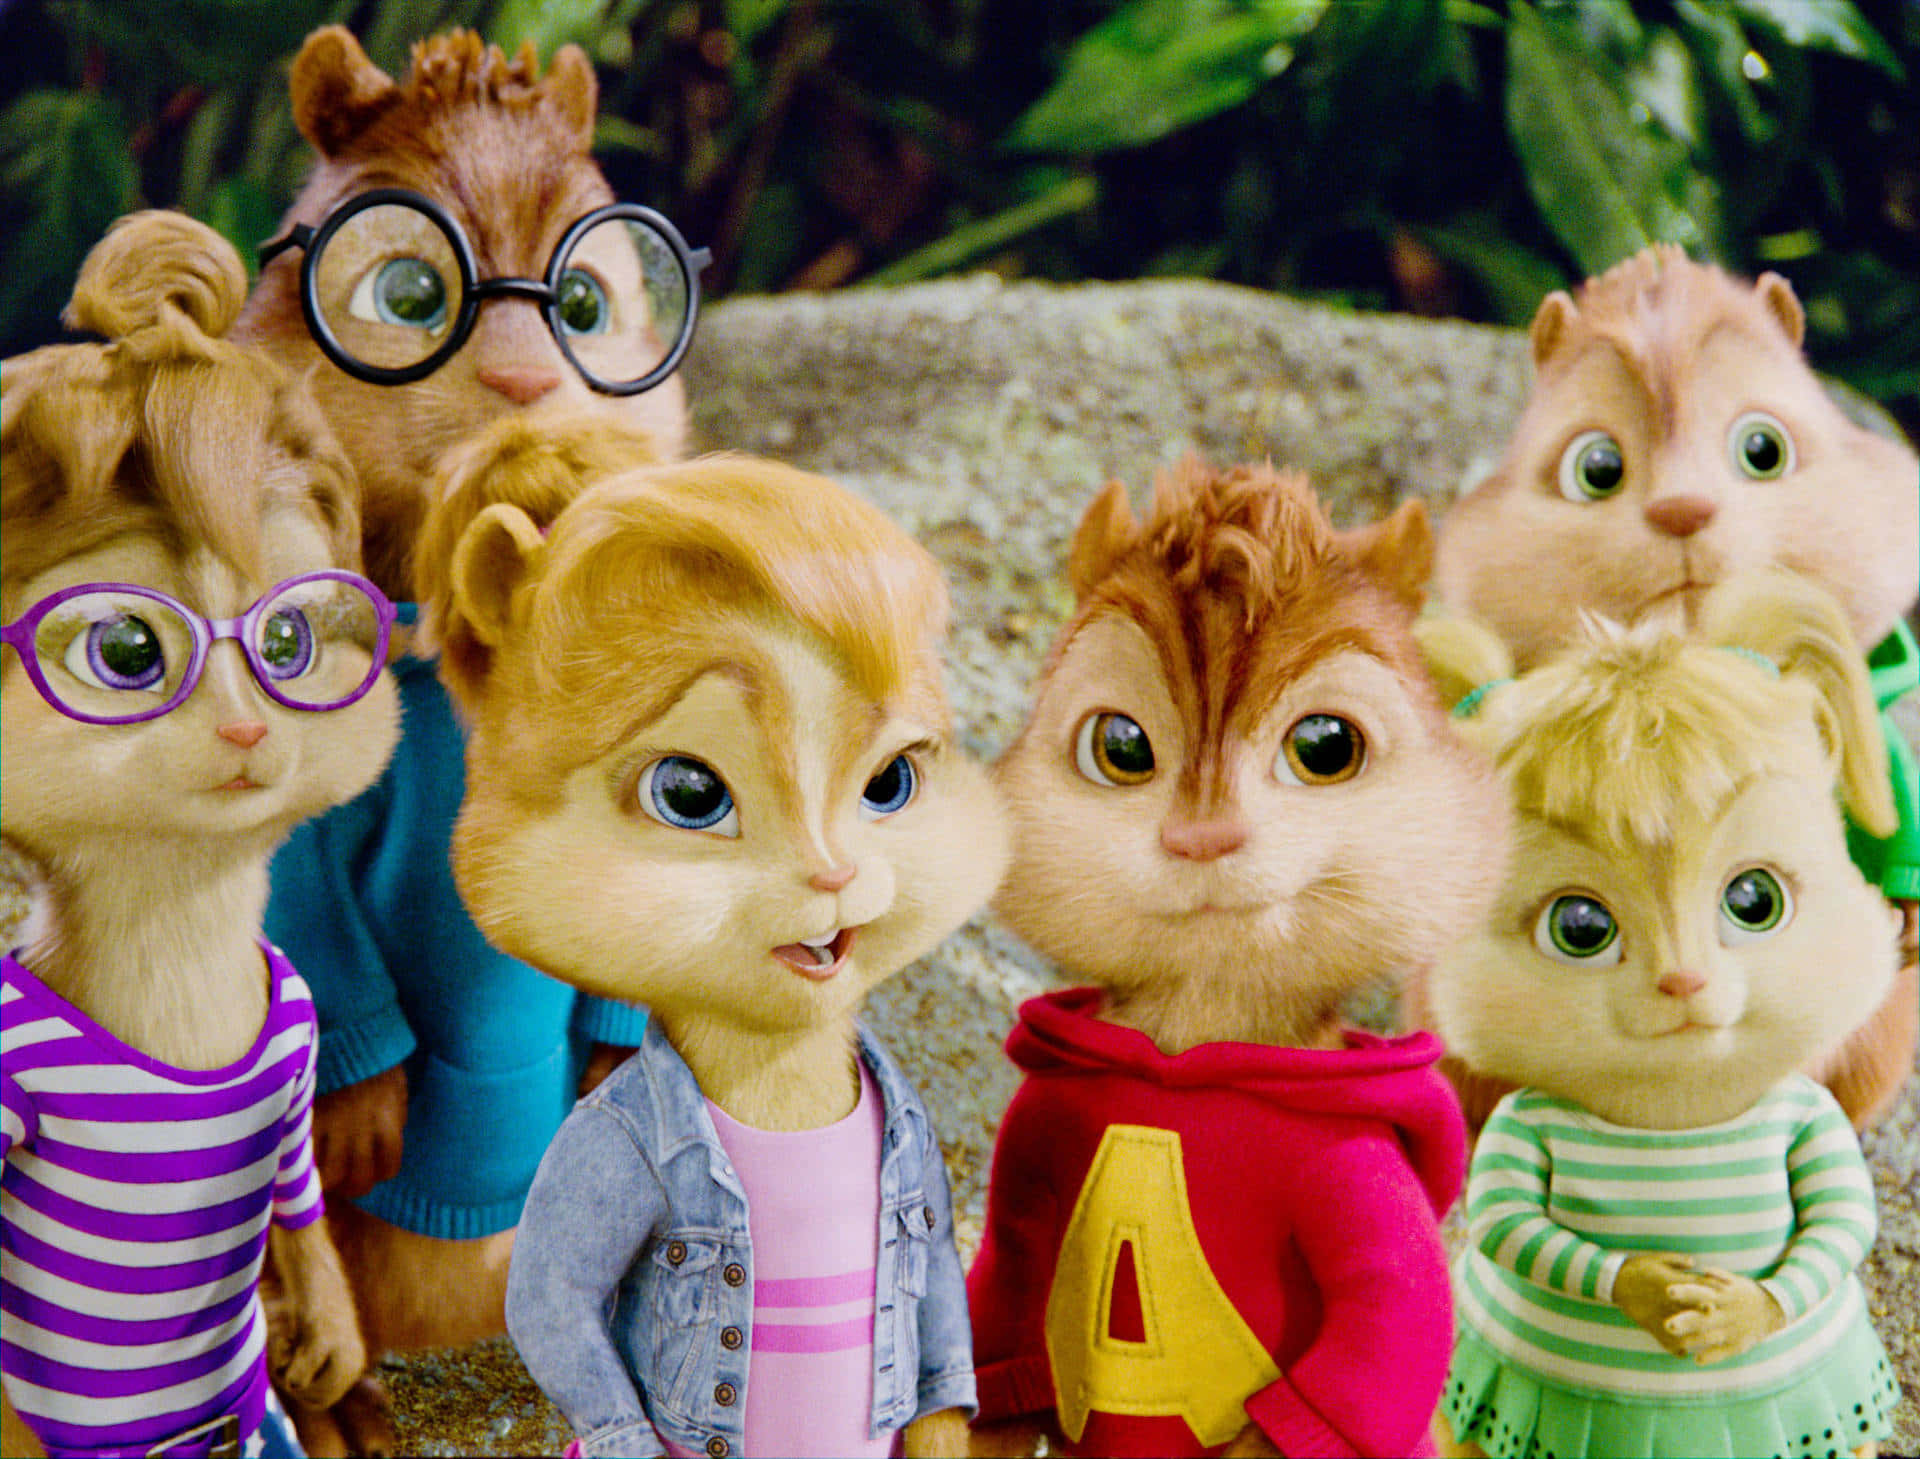 Sing along with Alvin, Theodore, and Simon!